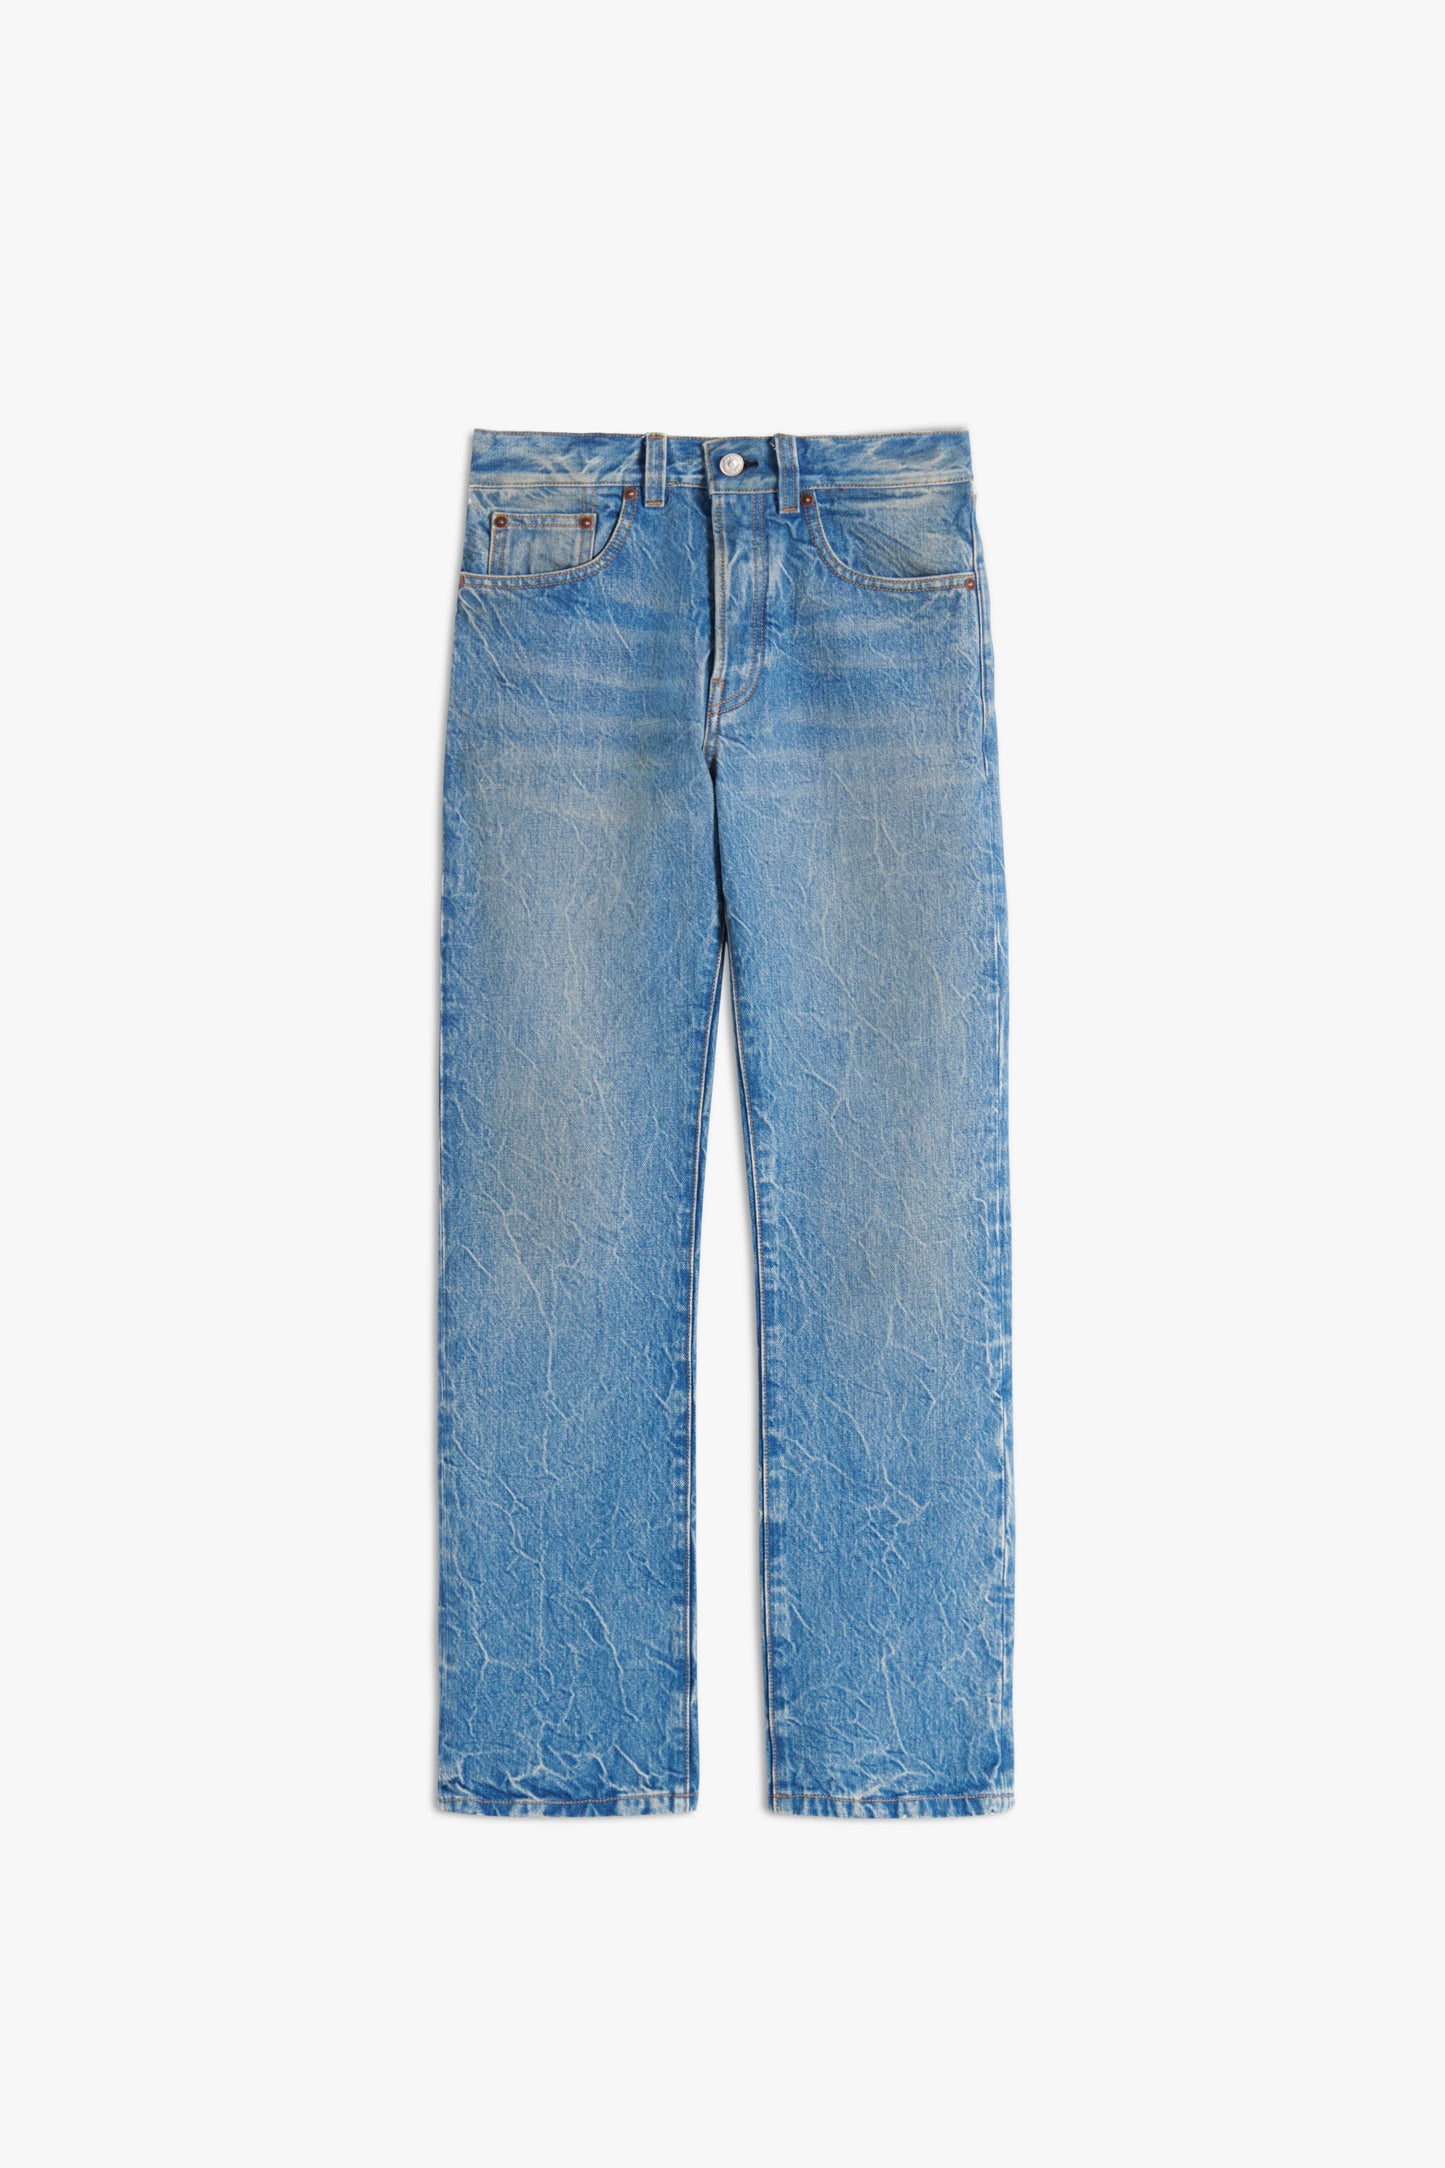 Product view of the Victoria jean in a cropped length style. Designer mid rise jeans from Victoria Beckham in a washed denim colour, with a branded leather patch and a classic button fly detail.